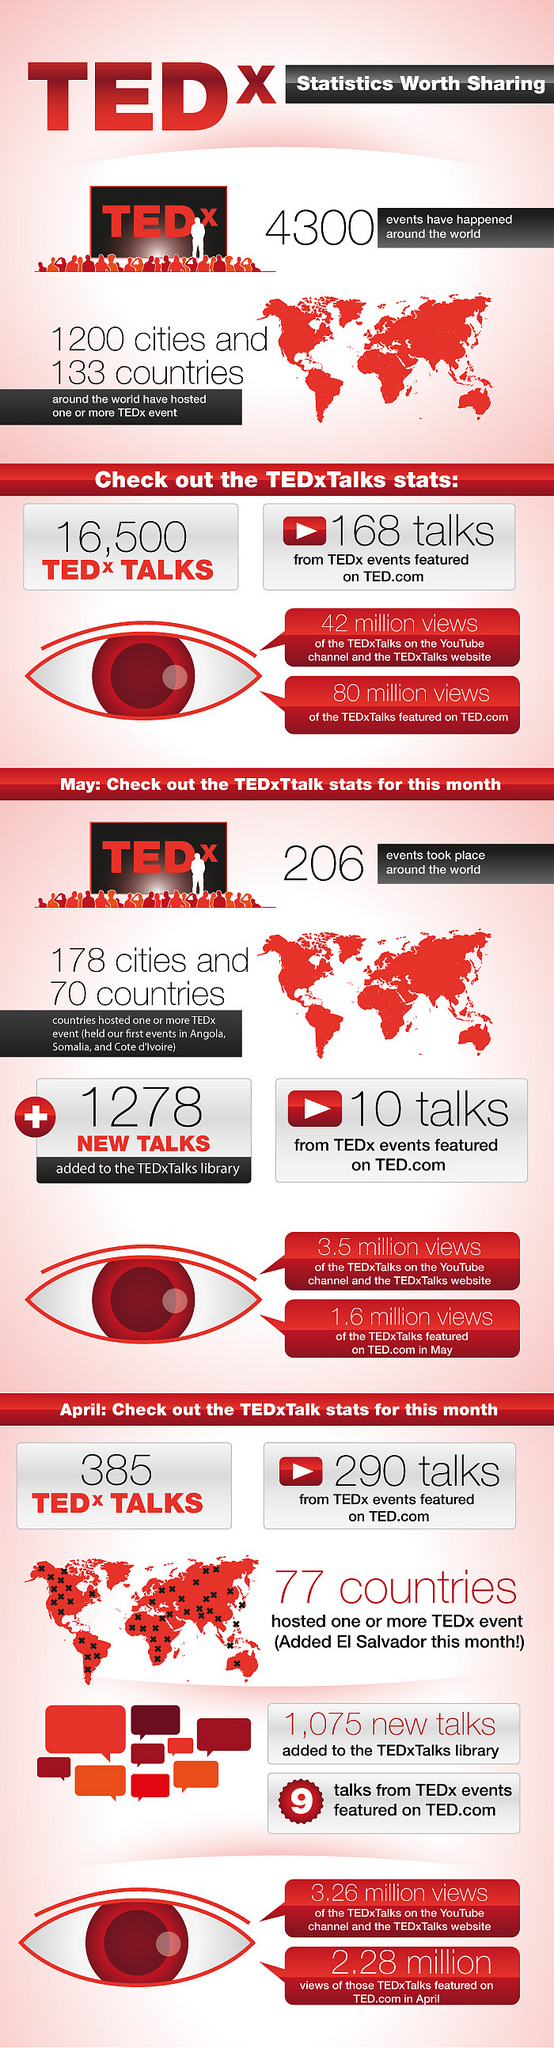 TEDx image with stats 2015